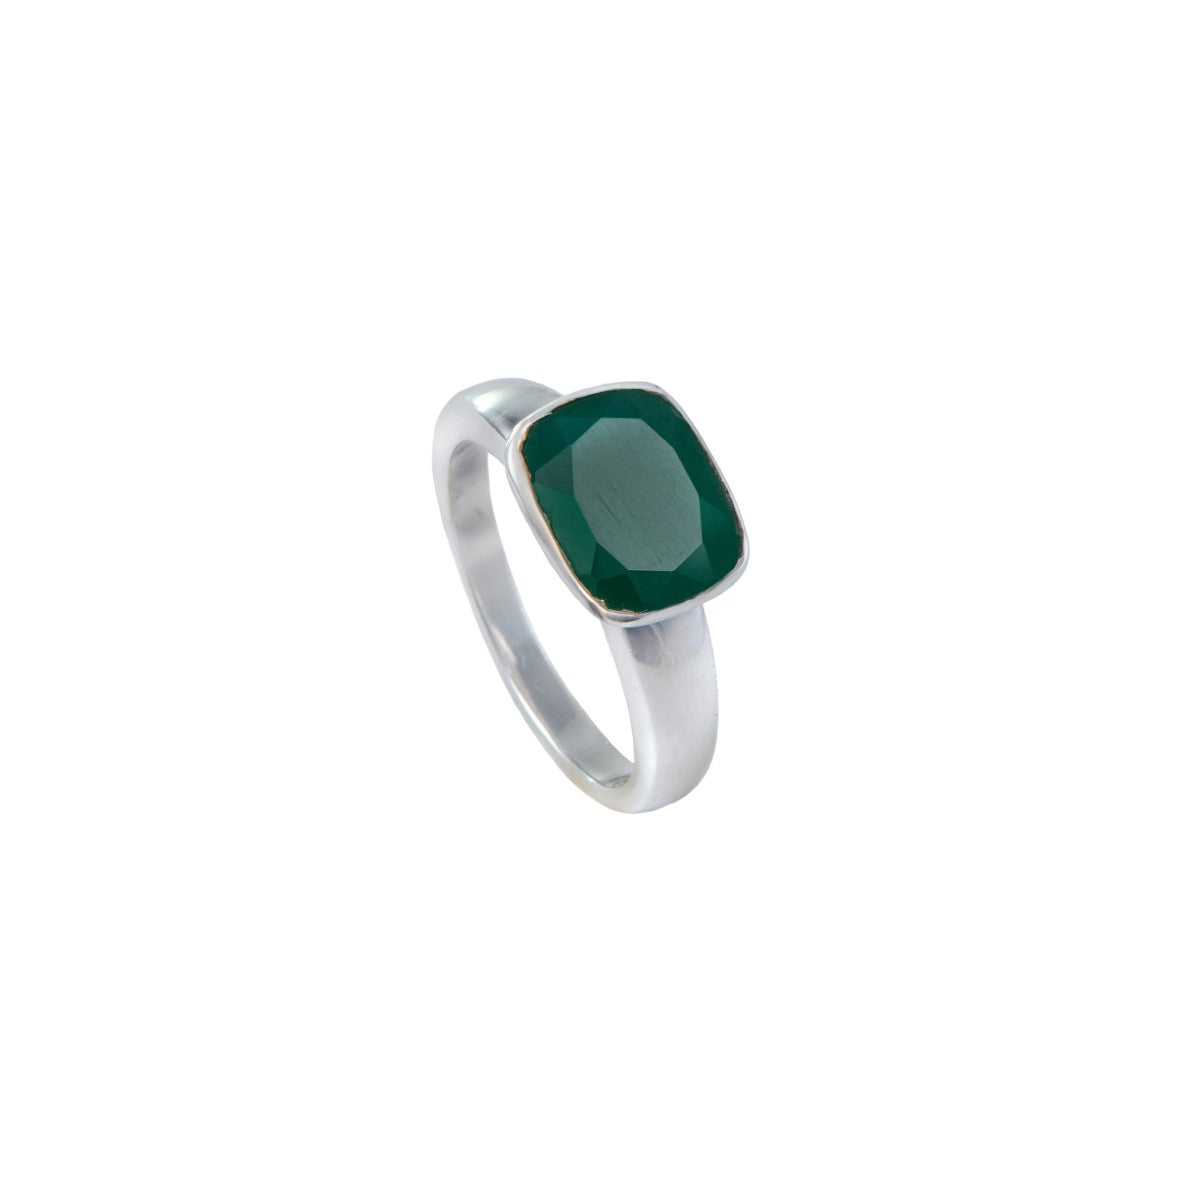 Faceted Rectangular Cut Natural Gemstone Sterling Silver Ring - Green Onyx